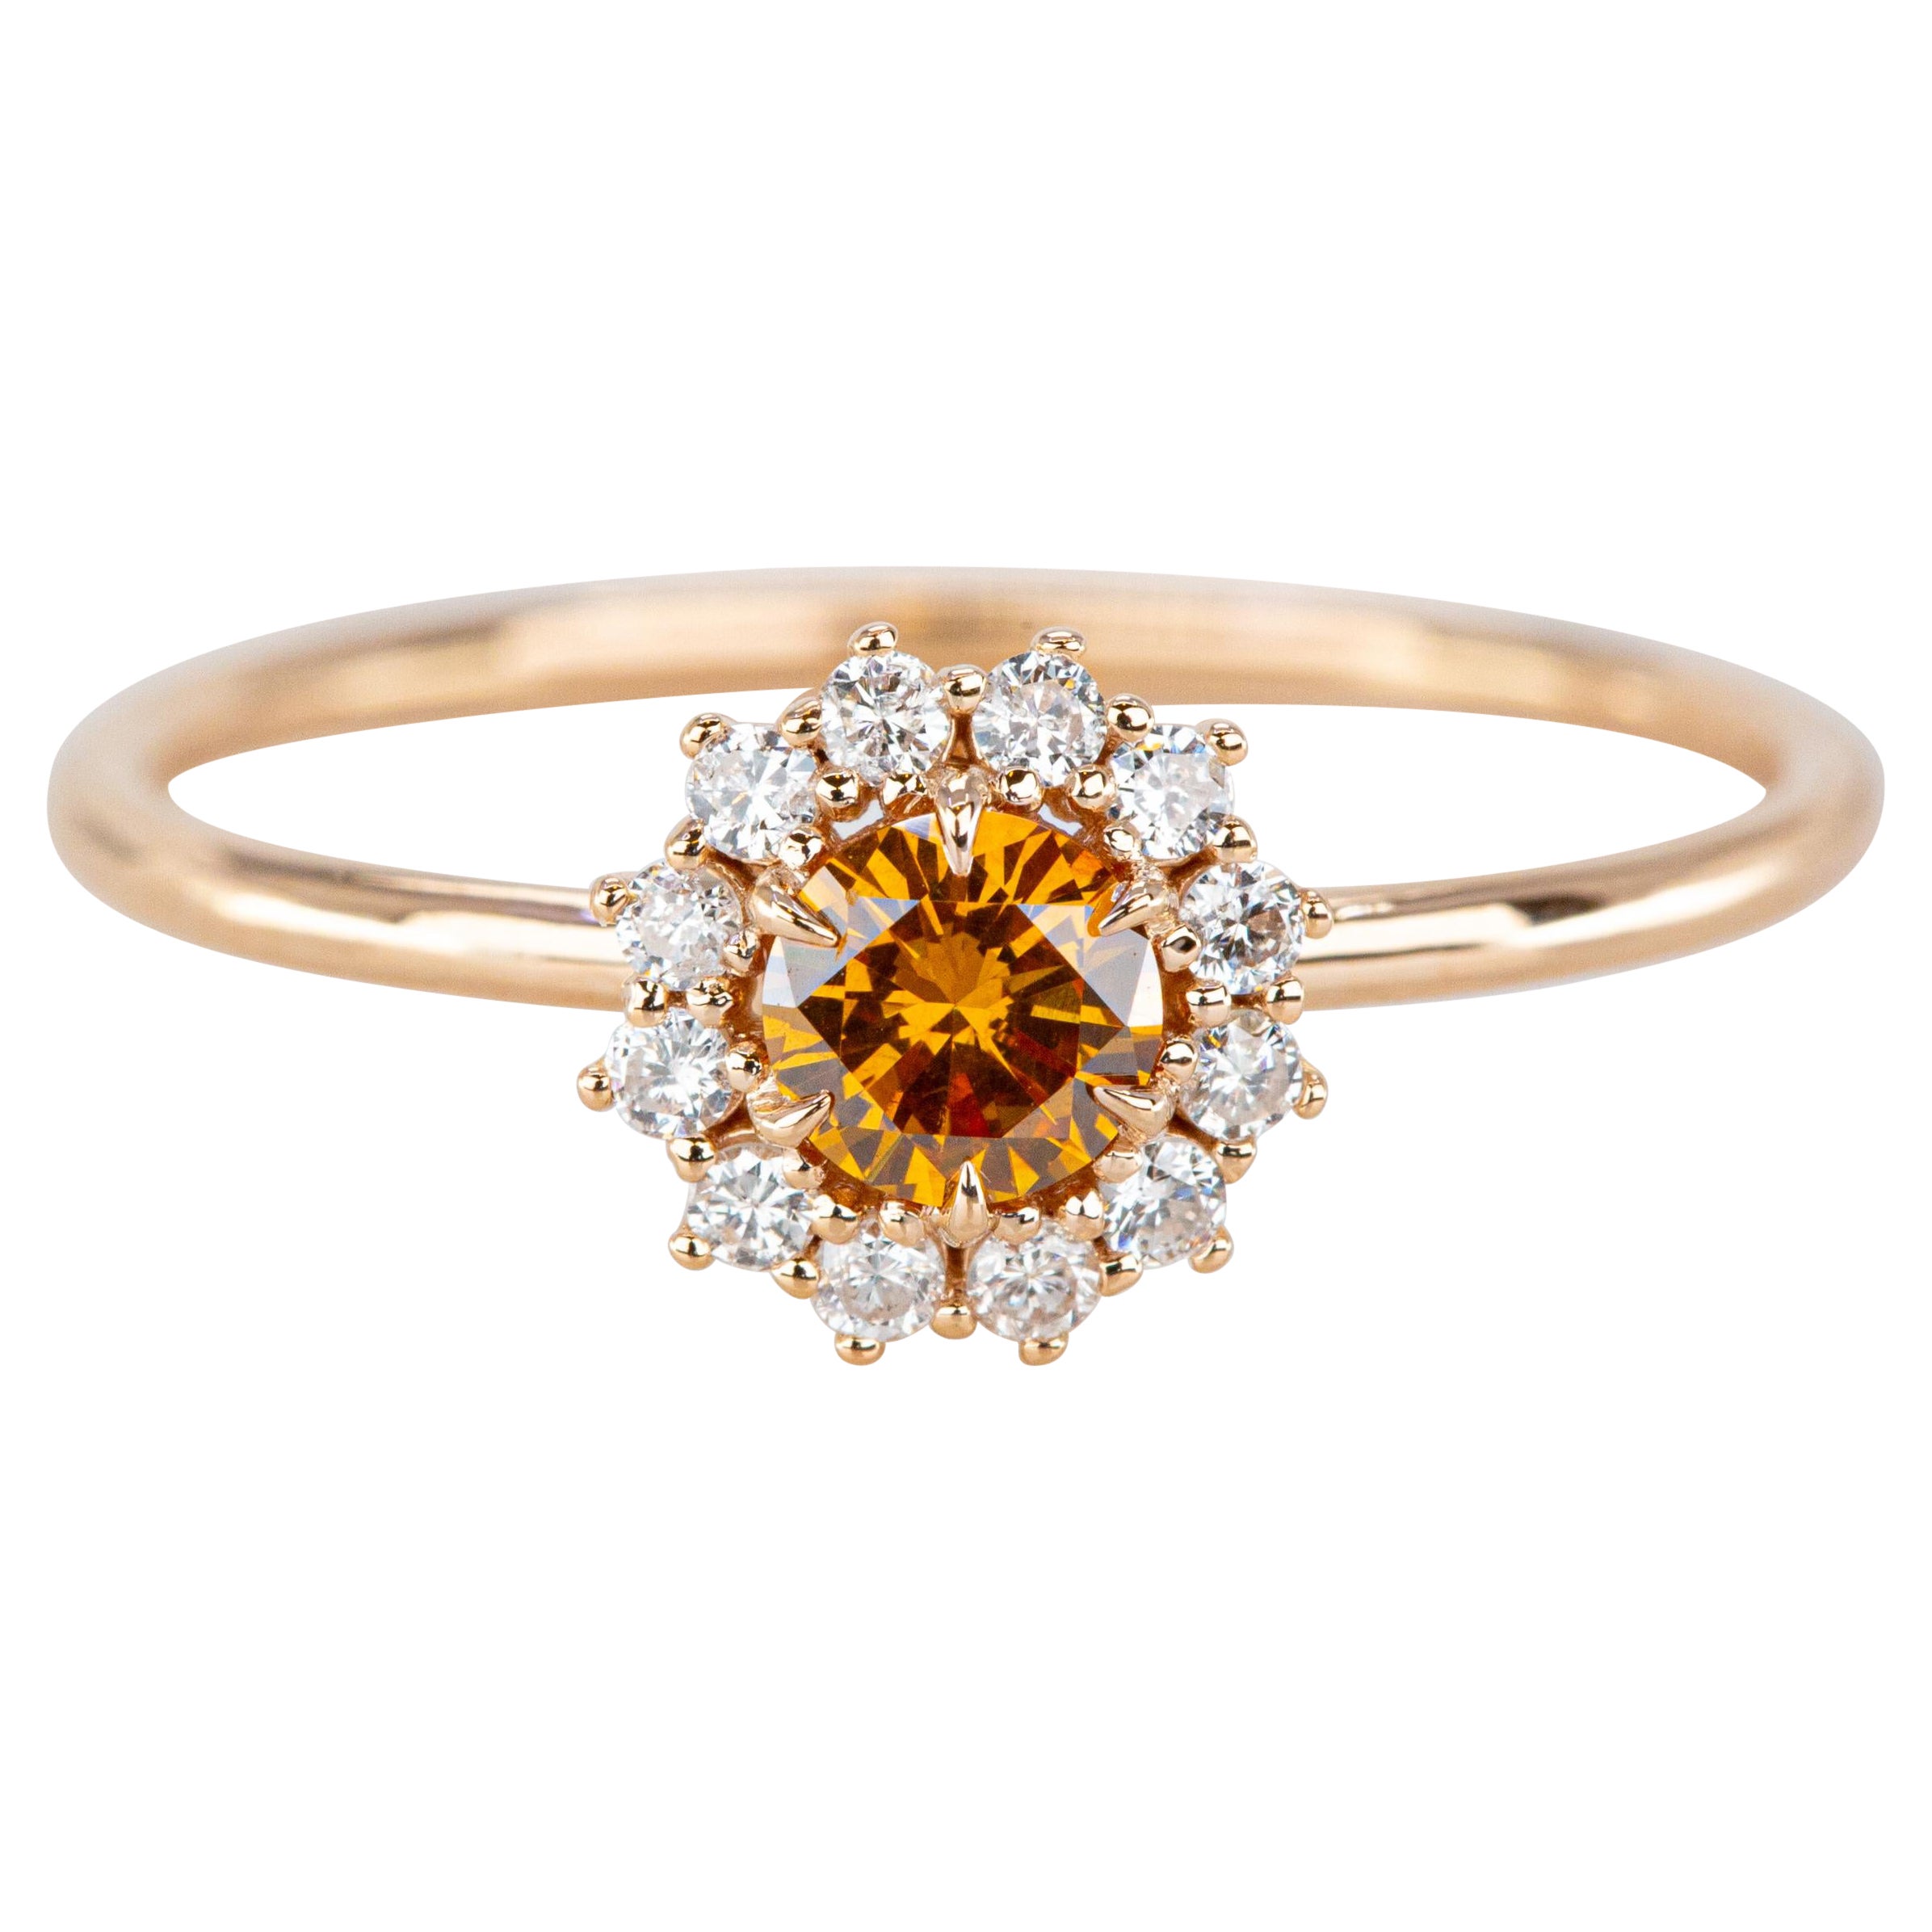 For Sale:  GIA 0.24 Ct. Fancy Deep Yellow-Orange Diamond 14K Gold Solitaire Ring